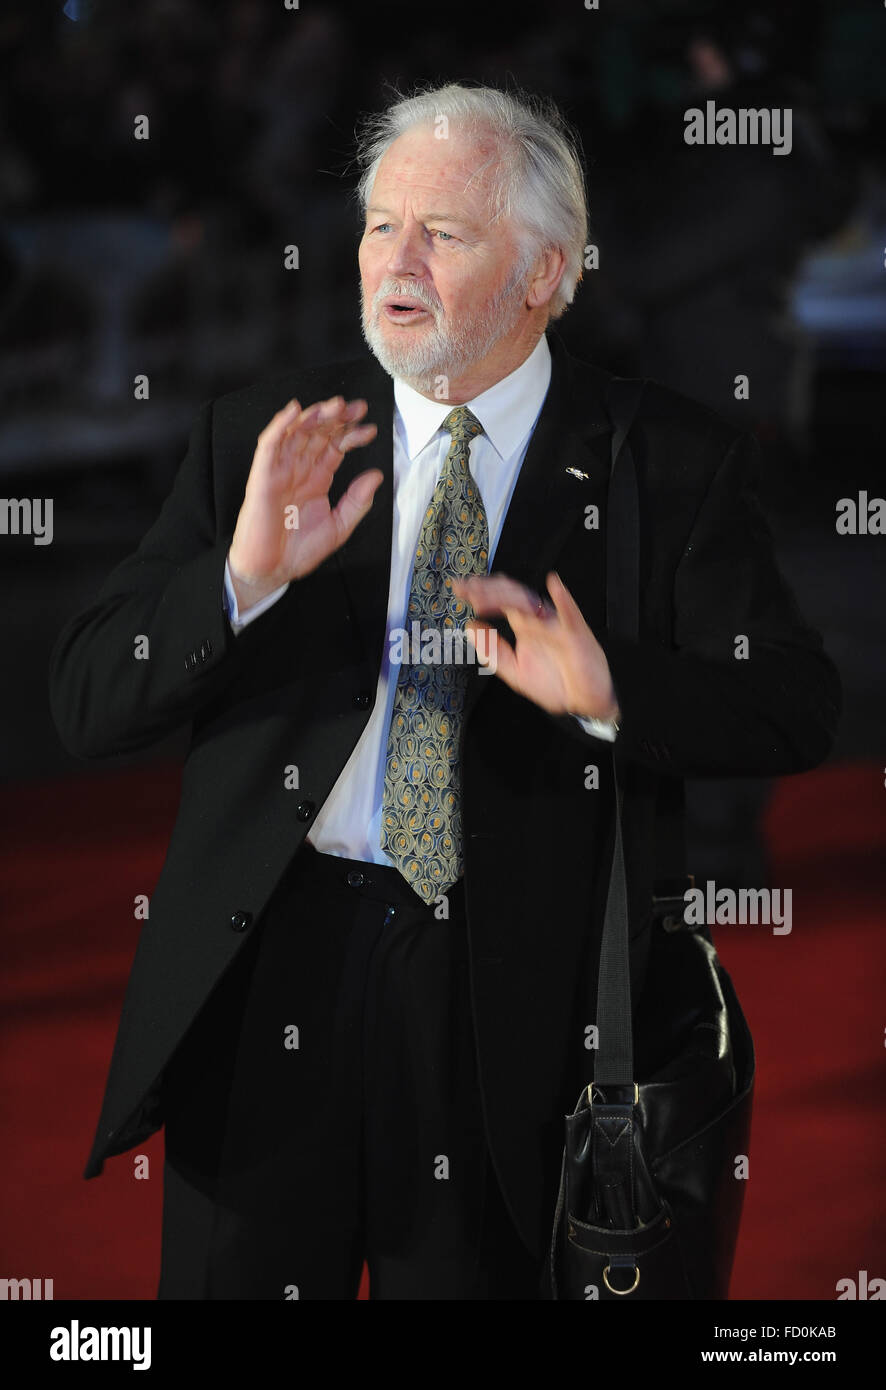 London, UK. 26th Jan, 2016. Ian Lavender attends the World Premiere of 'Dad's Army' at Odeon Leciester Square. Credit:  Ferdaus Shamim/ZUMA Wire/Alamy Live News Stock Photo